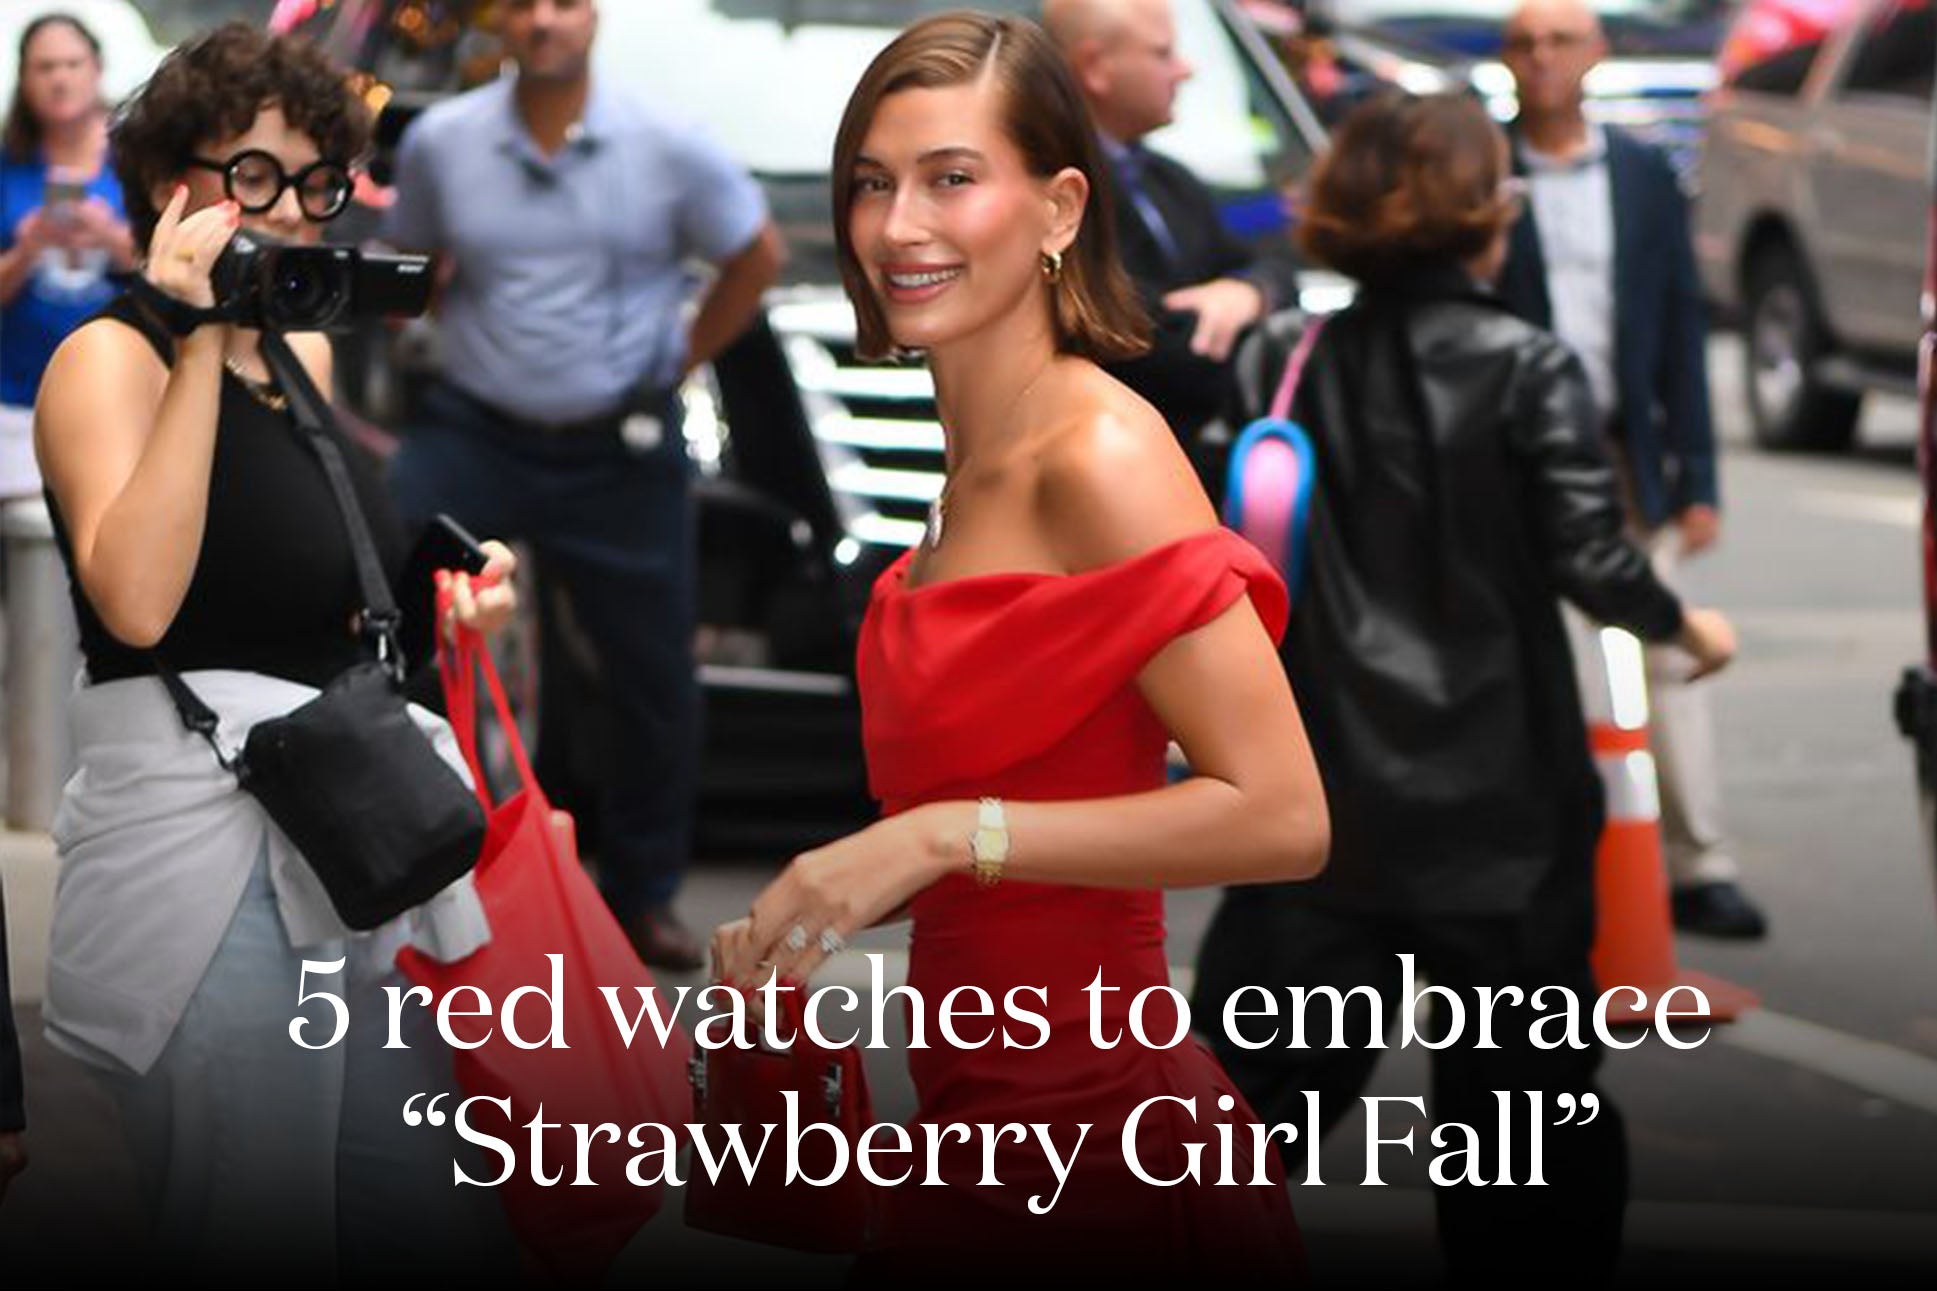 5 Red Watches to Embrace “Strawberry Girl Fall”